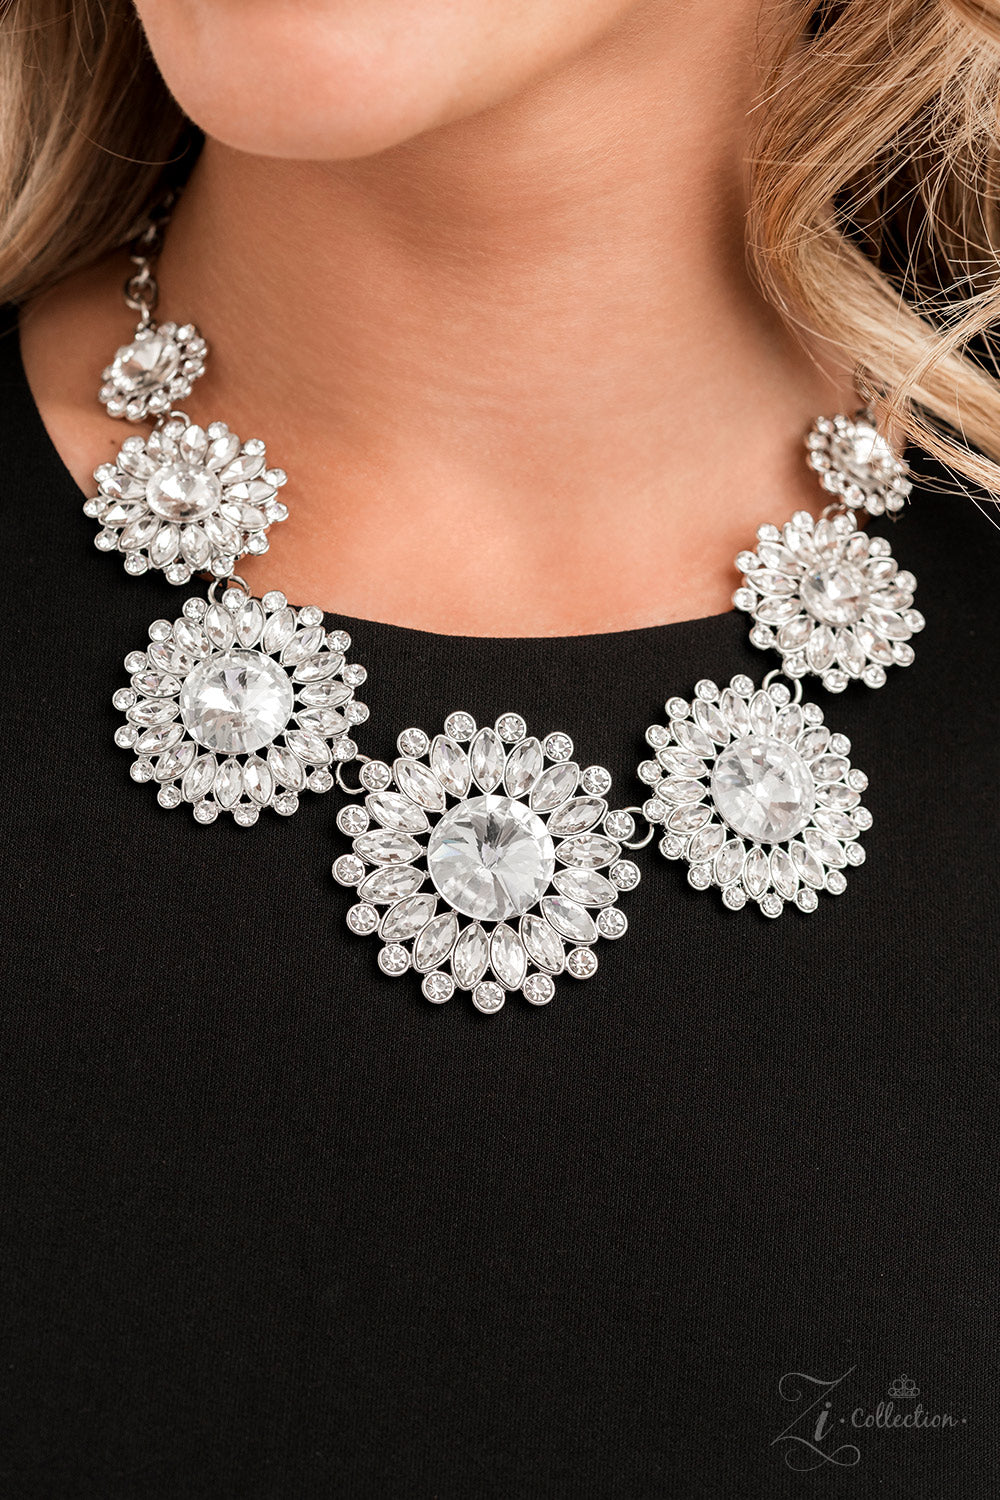 Paparazzi Accessories Optimistic Oversized classic white rhinestones are encircled by majestic marquise-cut rhinestones in the same radiant finish, creating a collection of stunning floral frames. Smaller white rhinestones fall in between each gorgeous ma